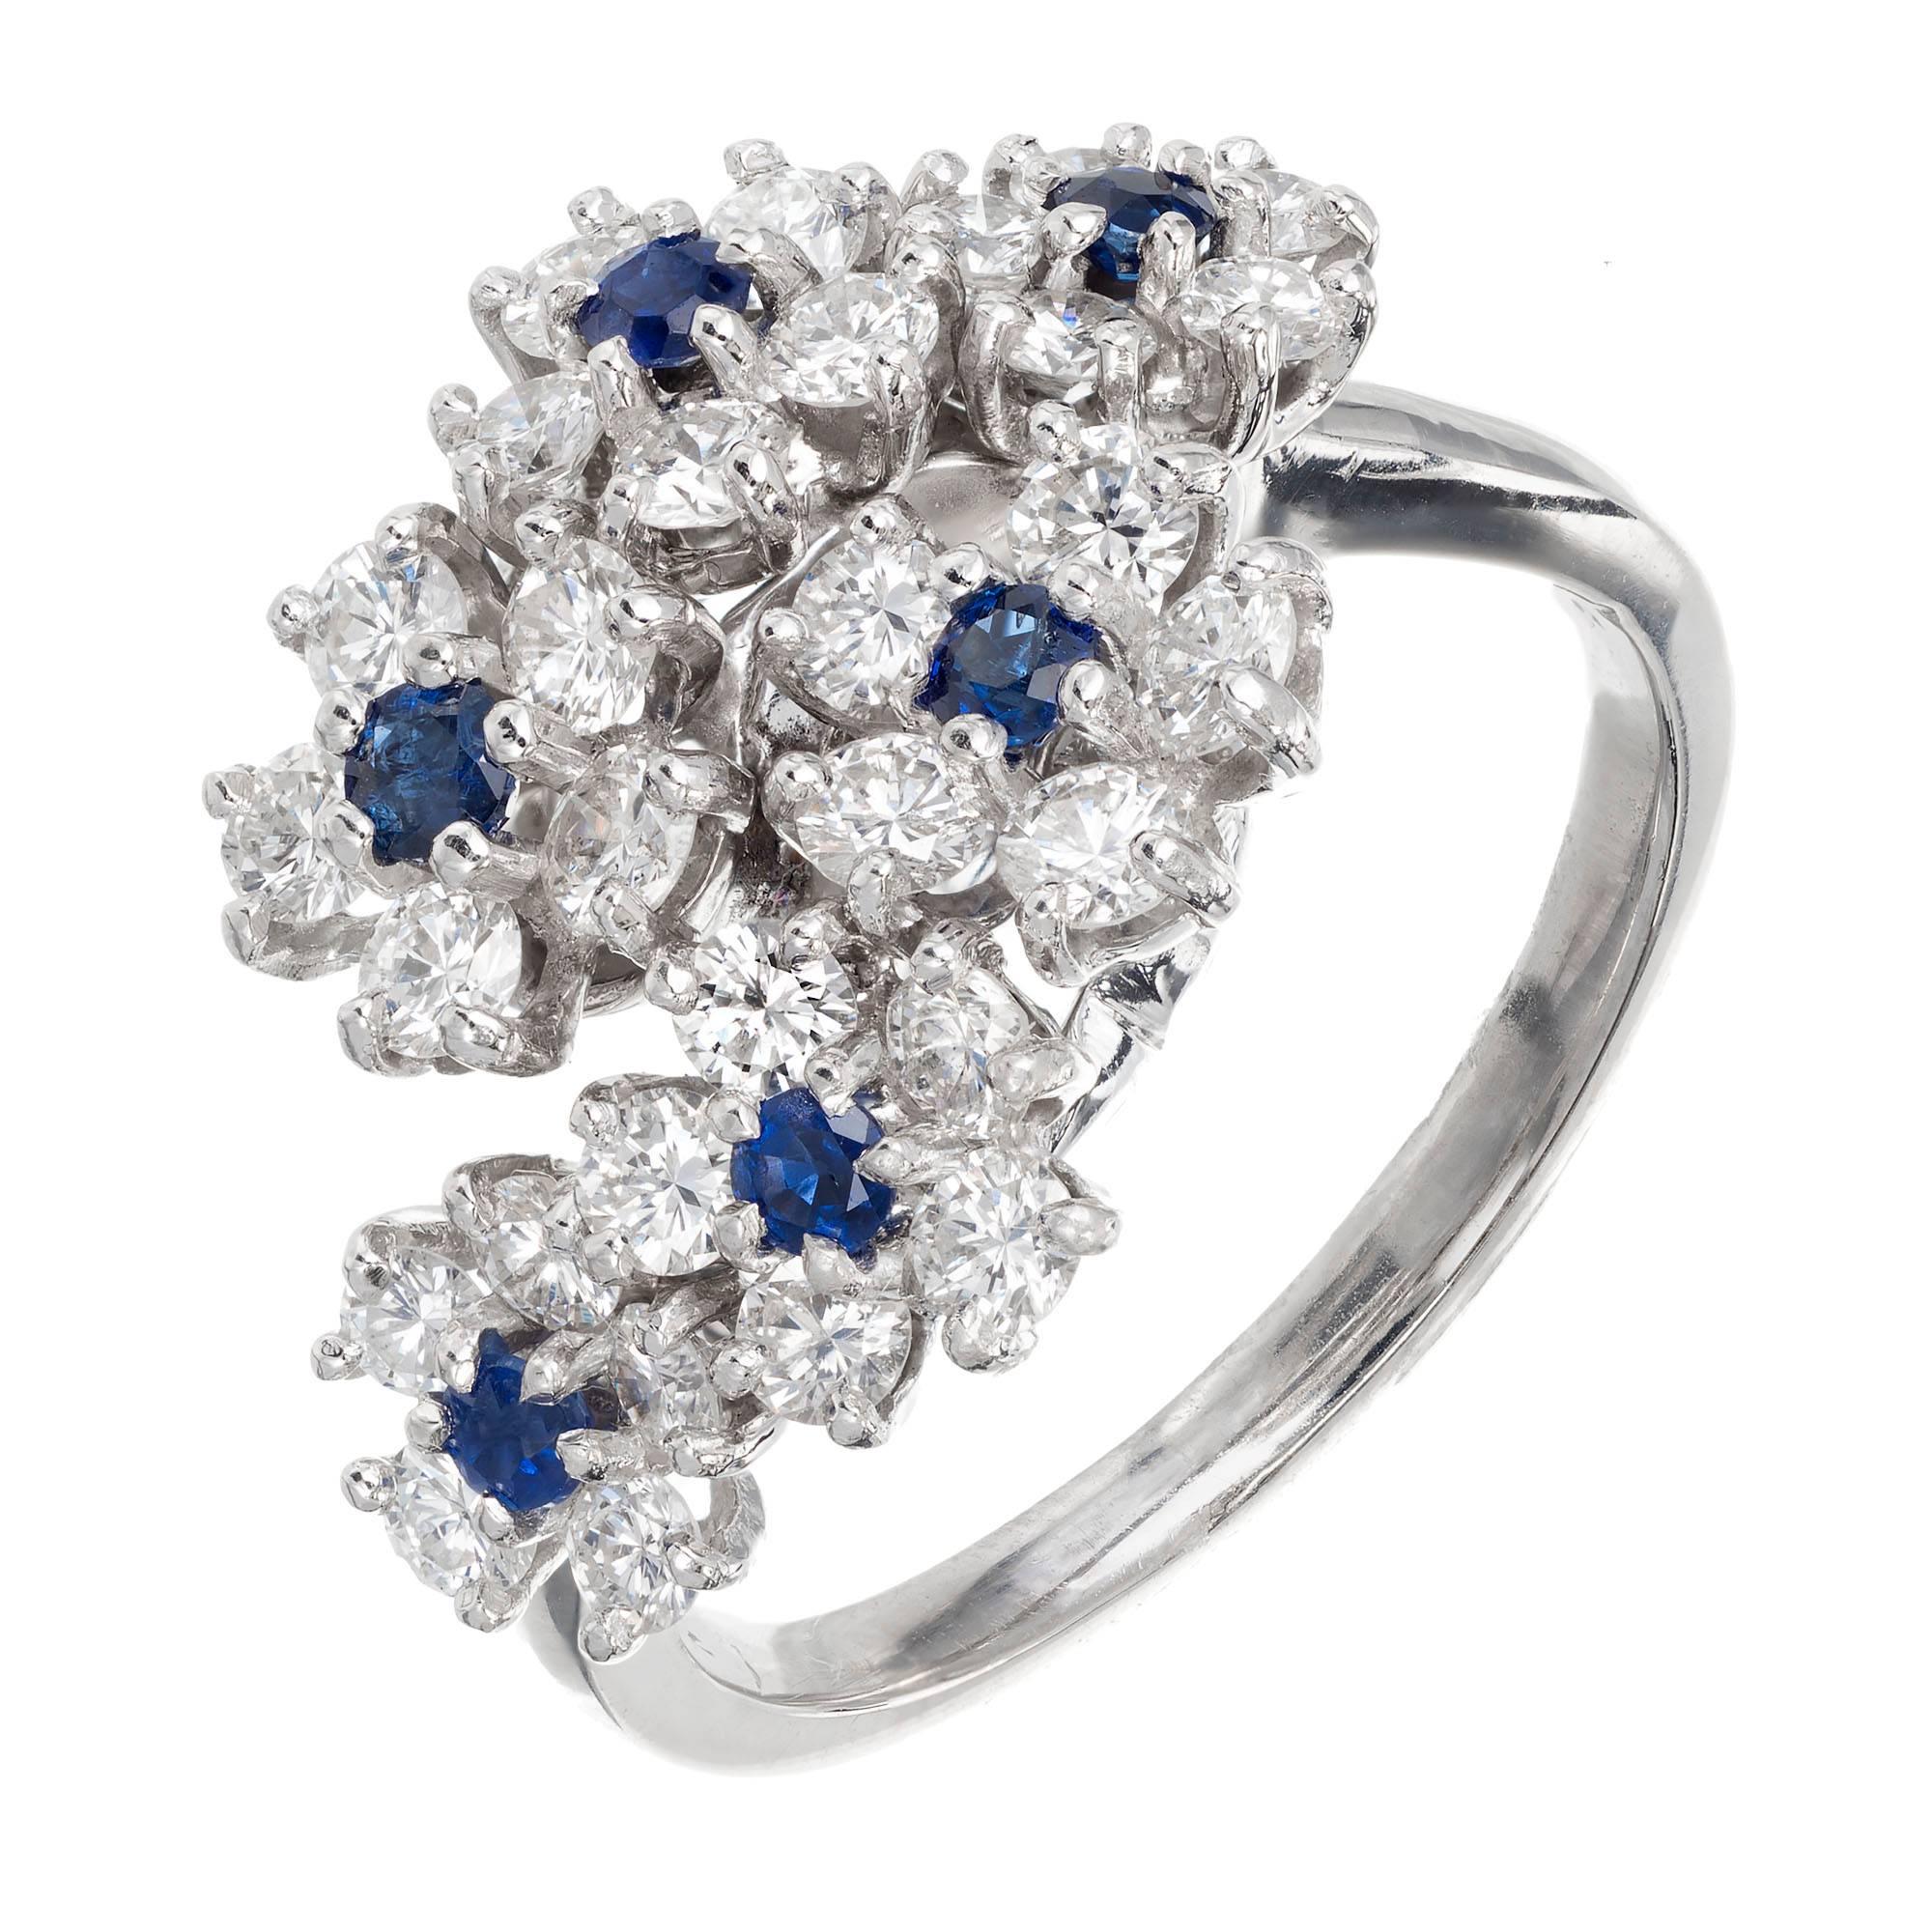 Oscar Heyman bypass platinum diamond sapphire cocktail ring. Six Sapphires with diamond halos in a bypass style design, set in platinum. 

30 round full cut diamonds F to VVS approximate 1.10 carats
6 round bright blue sapphires VS 2mm approximate